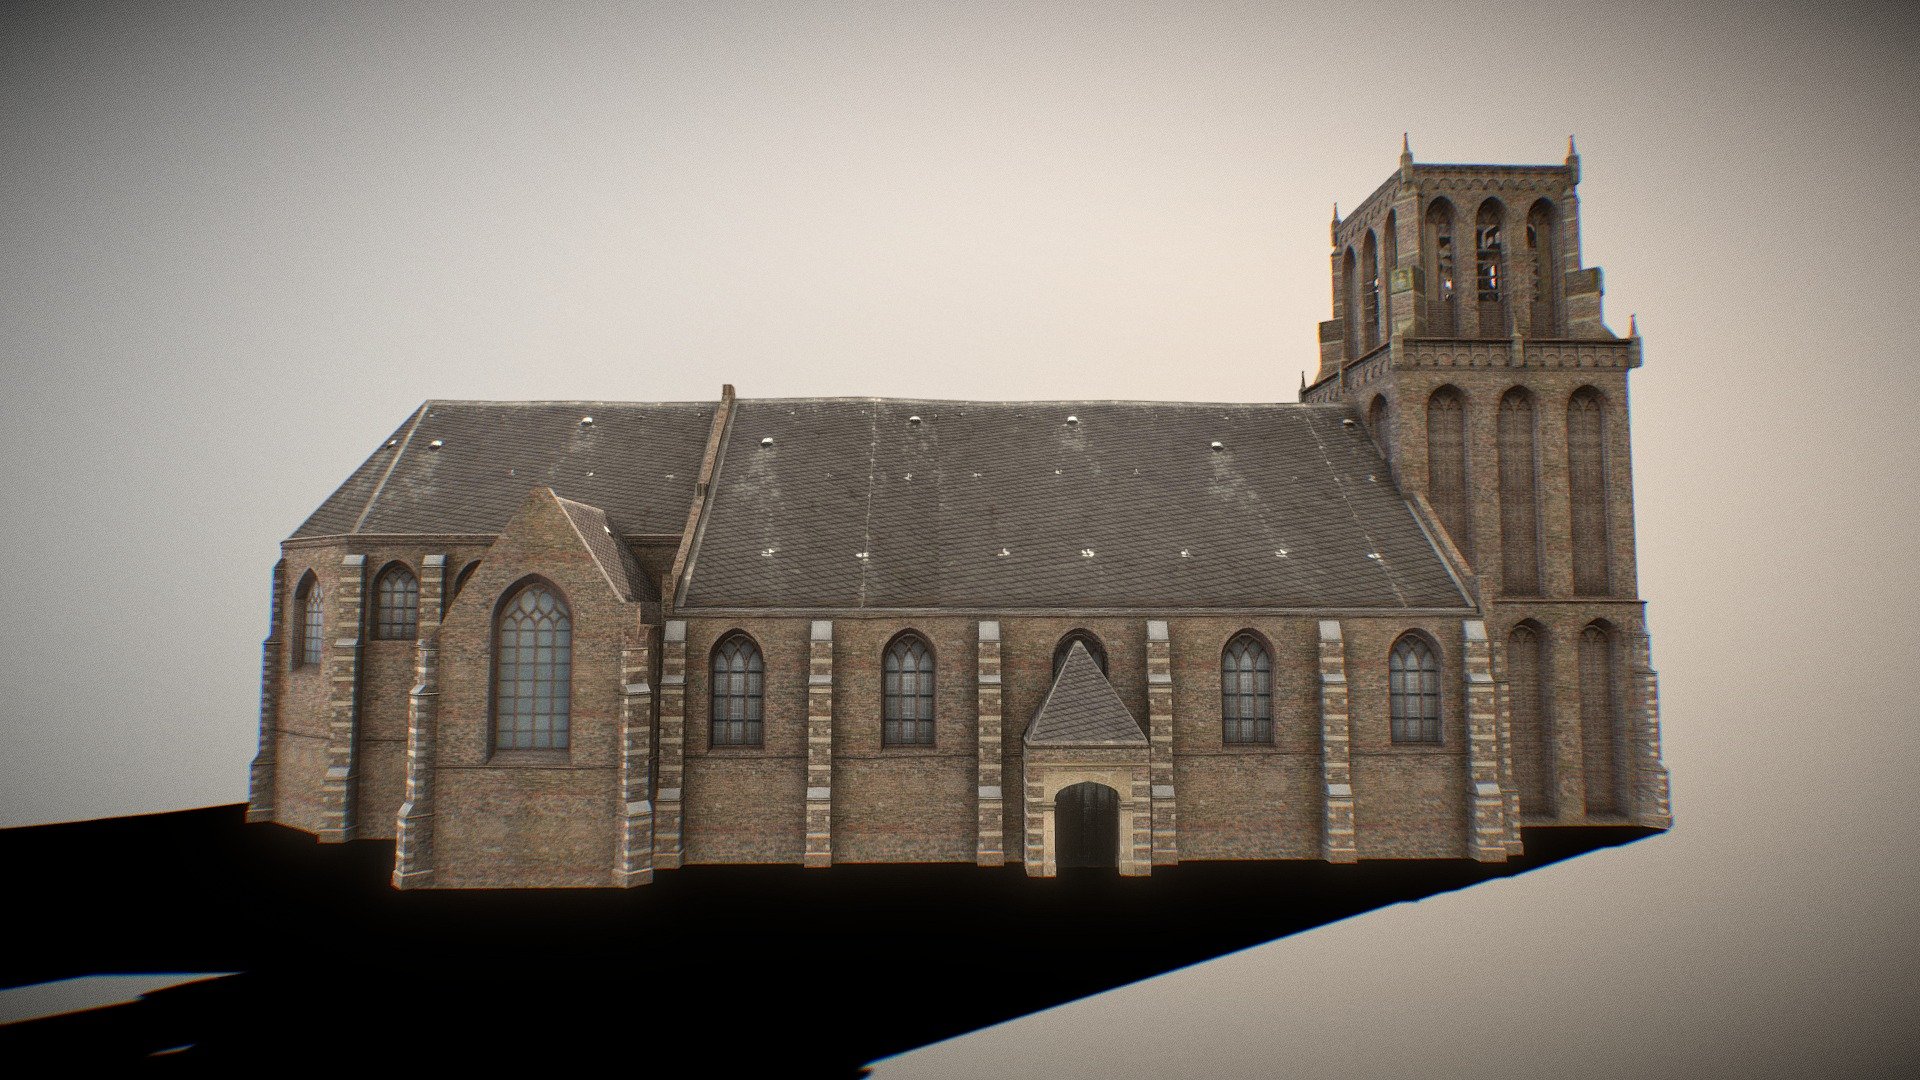 This is a 3d model of Old medieval church ready for V.R, A.R,games and other real-time PBR render engines like Unreal and Unity.
Low poly-game ready model of Old Church_ with 4k resolution textures.
This model is in real proportions 3d model